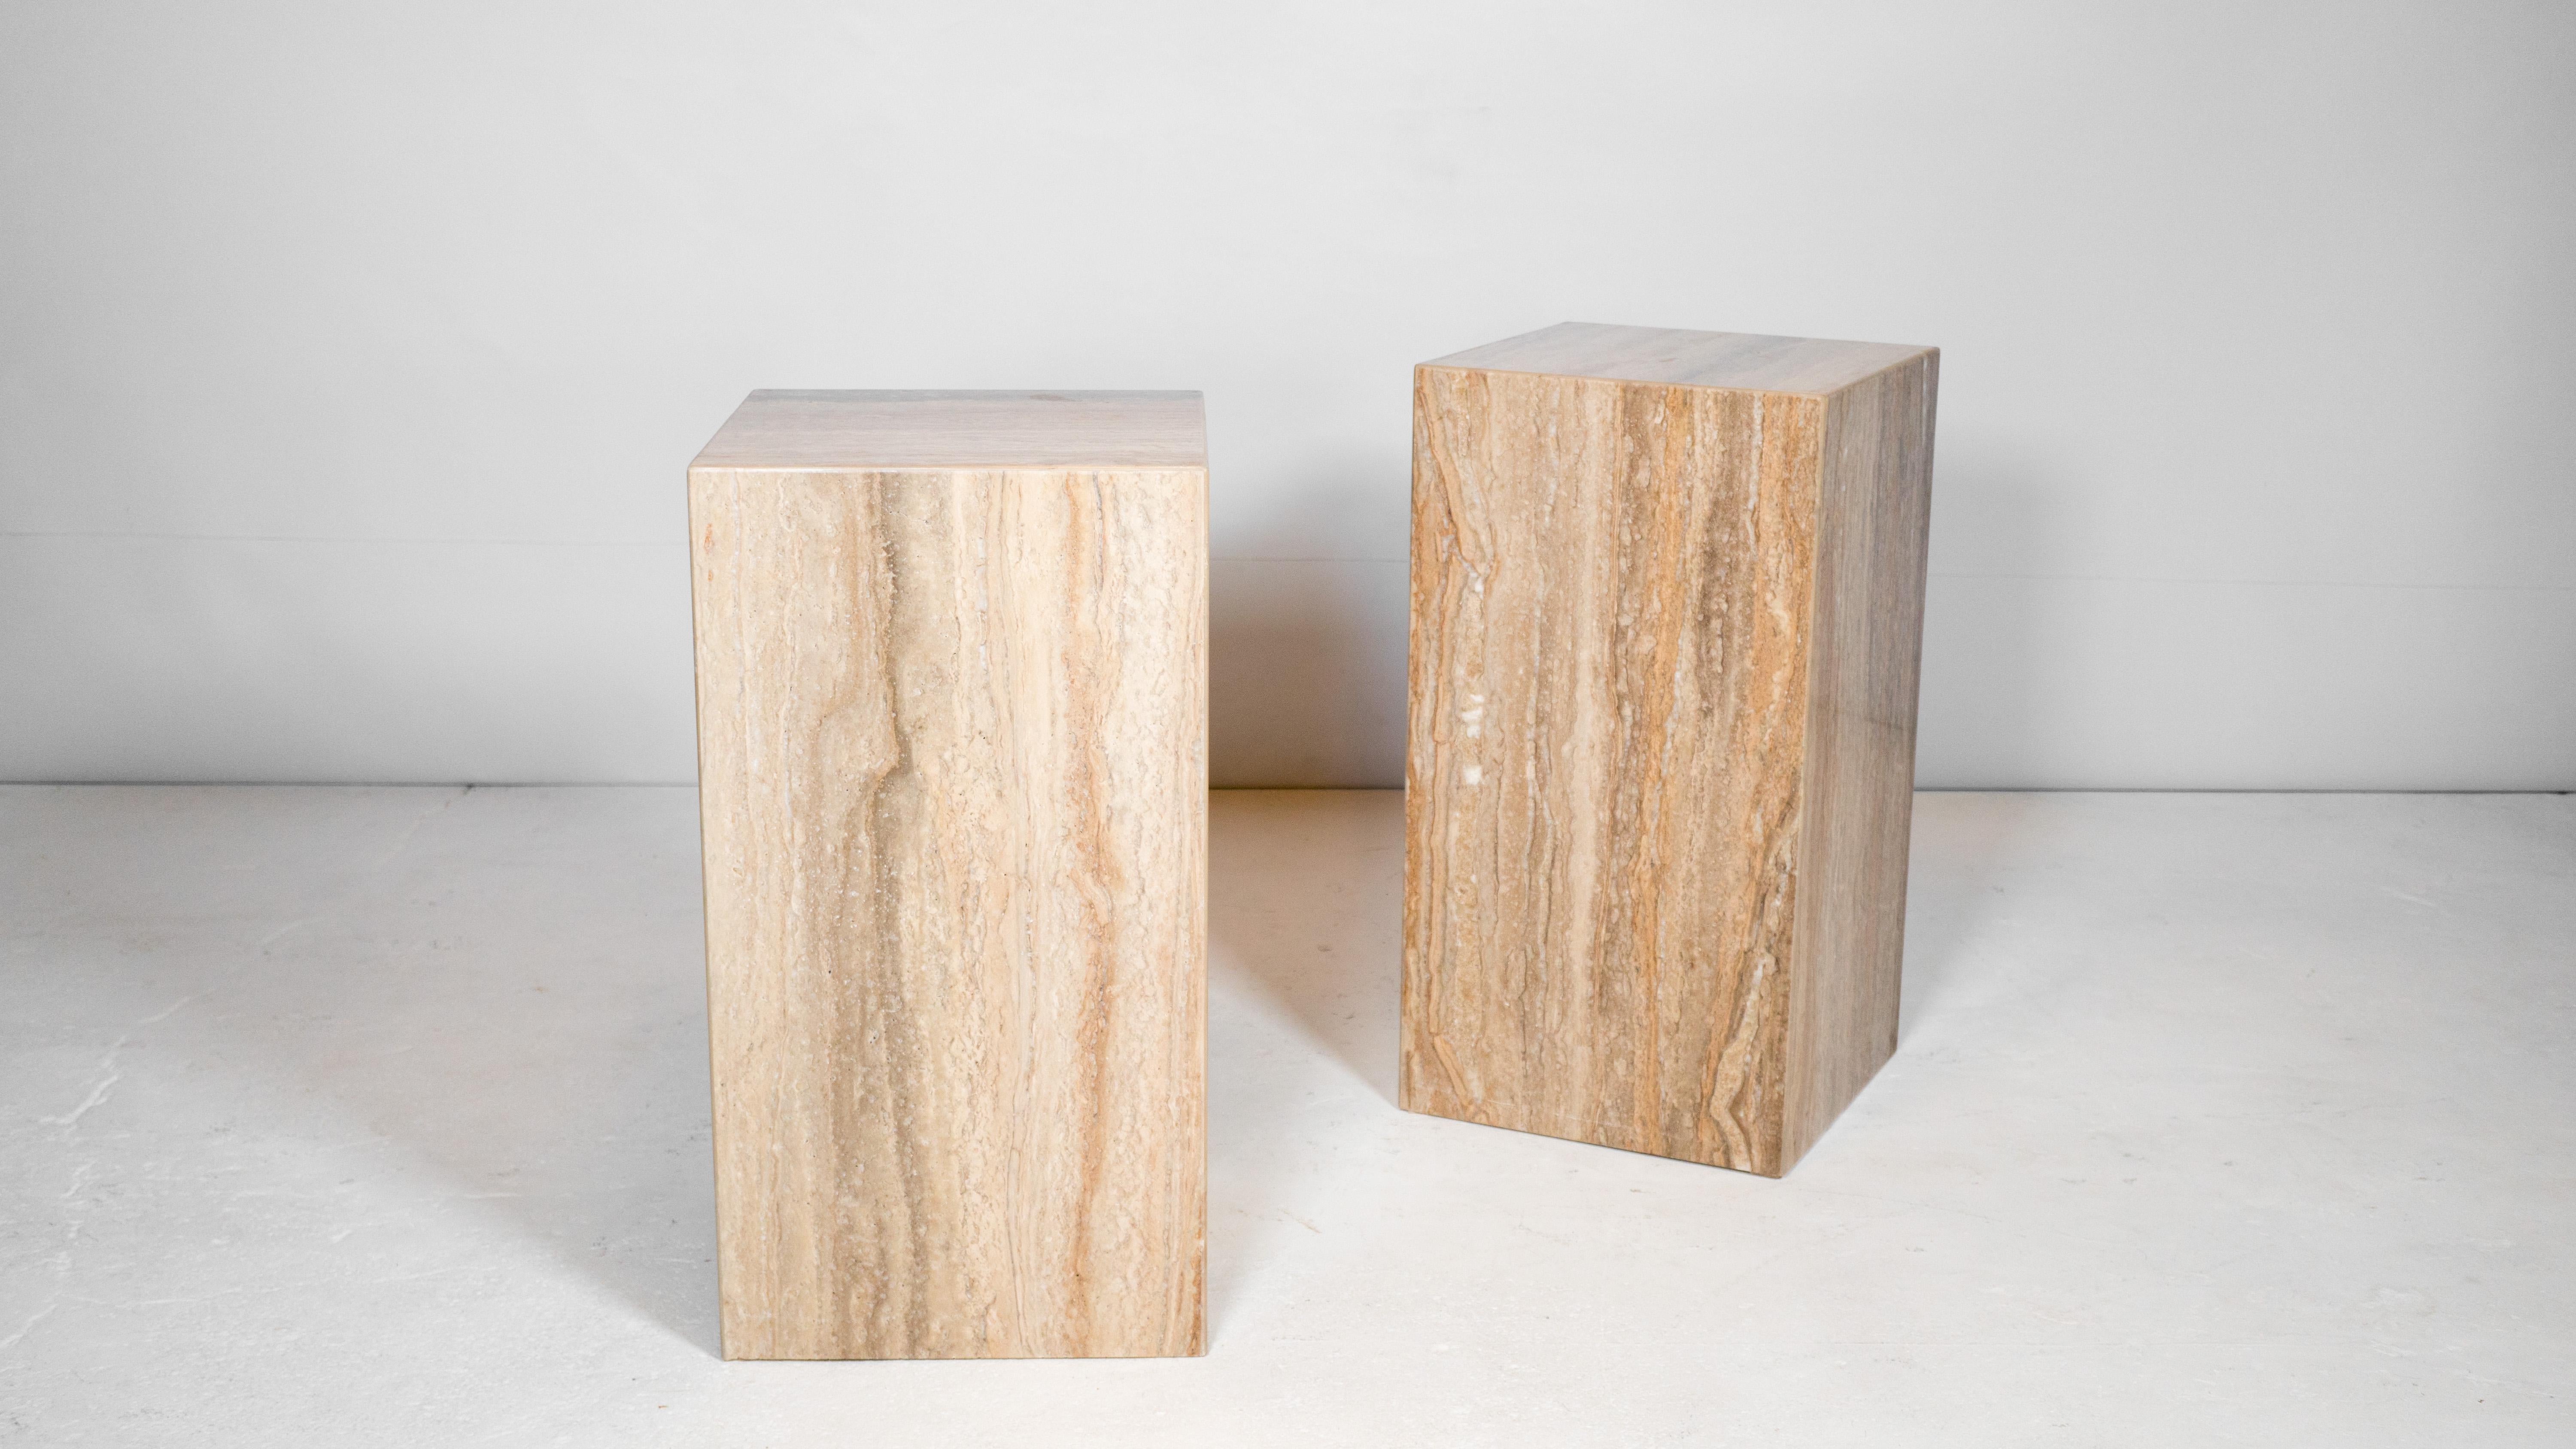 Late 20th Century 1980s Italian Polished Travertine Tower Cube Side Tables - a Pair For Sale